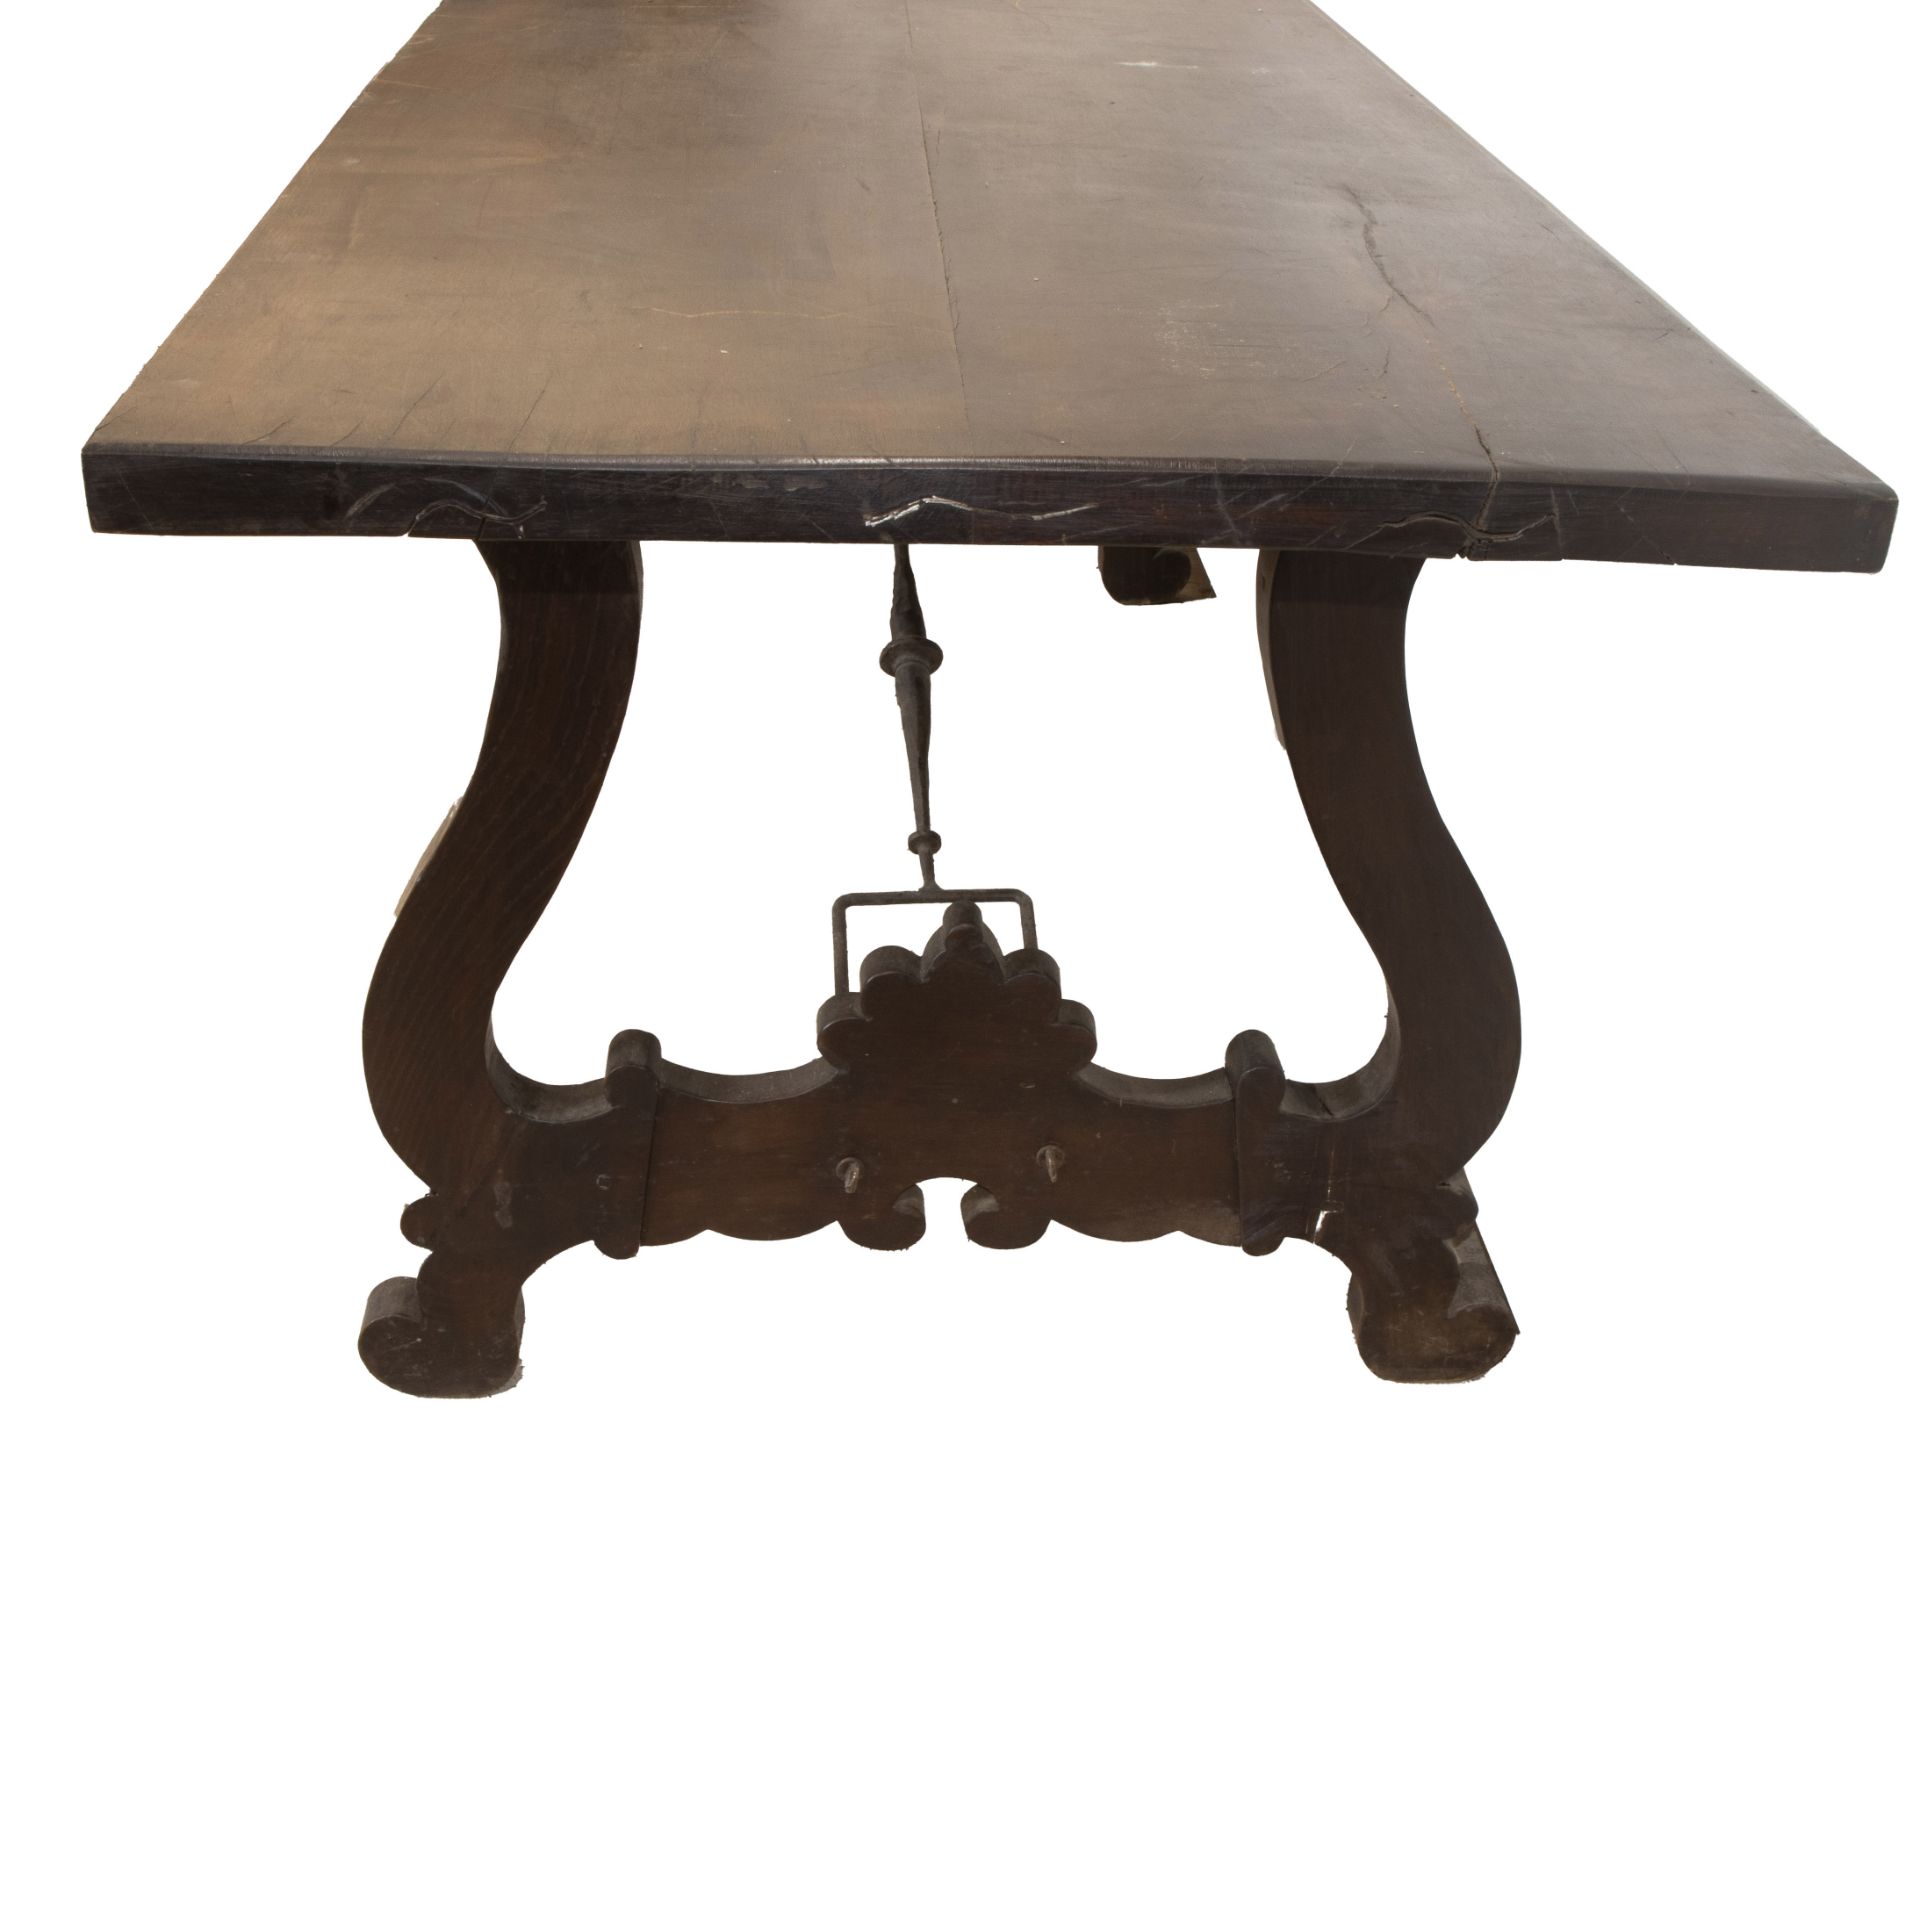 Old oak table with wrought ironwork between the legs after Spanish 17th-century example - Bild 3 aus 3